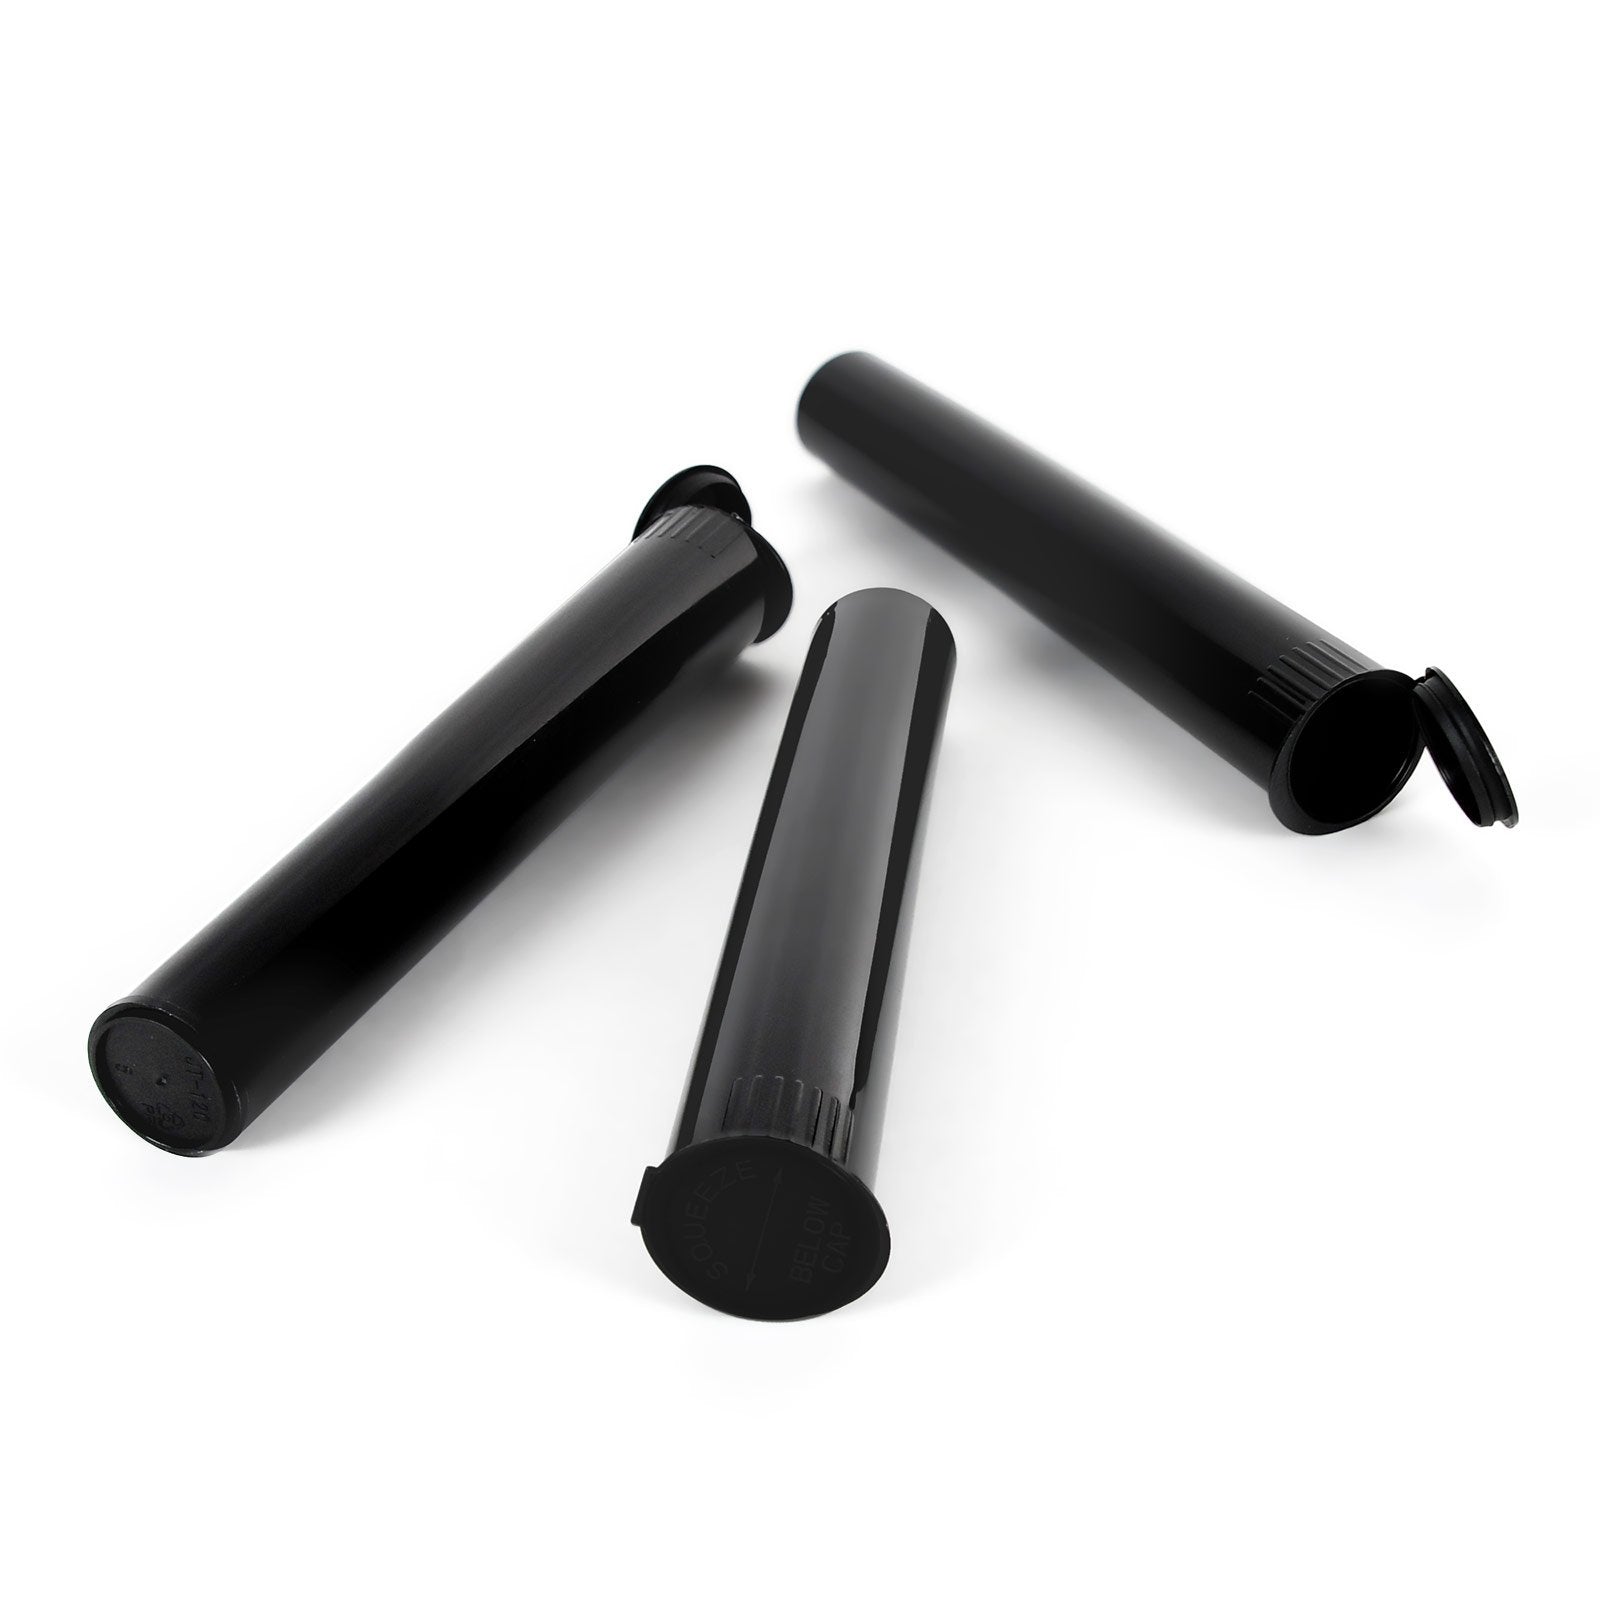 120mm Rx Squeeze Tubes Opaque Black - 1 Count